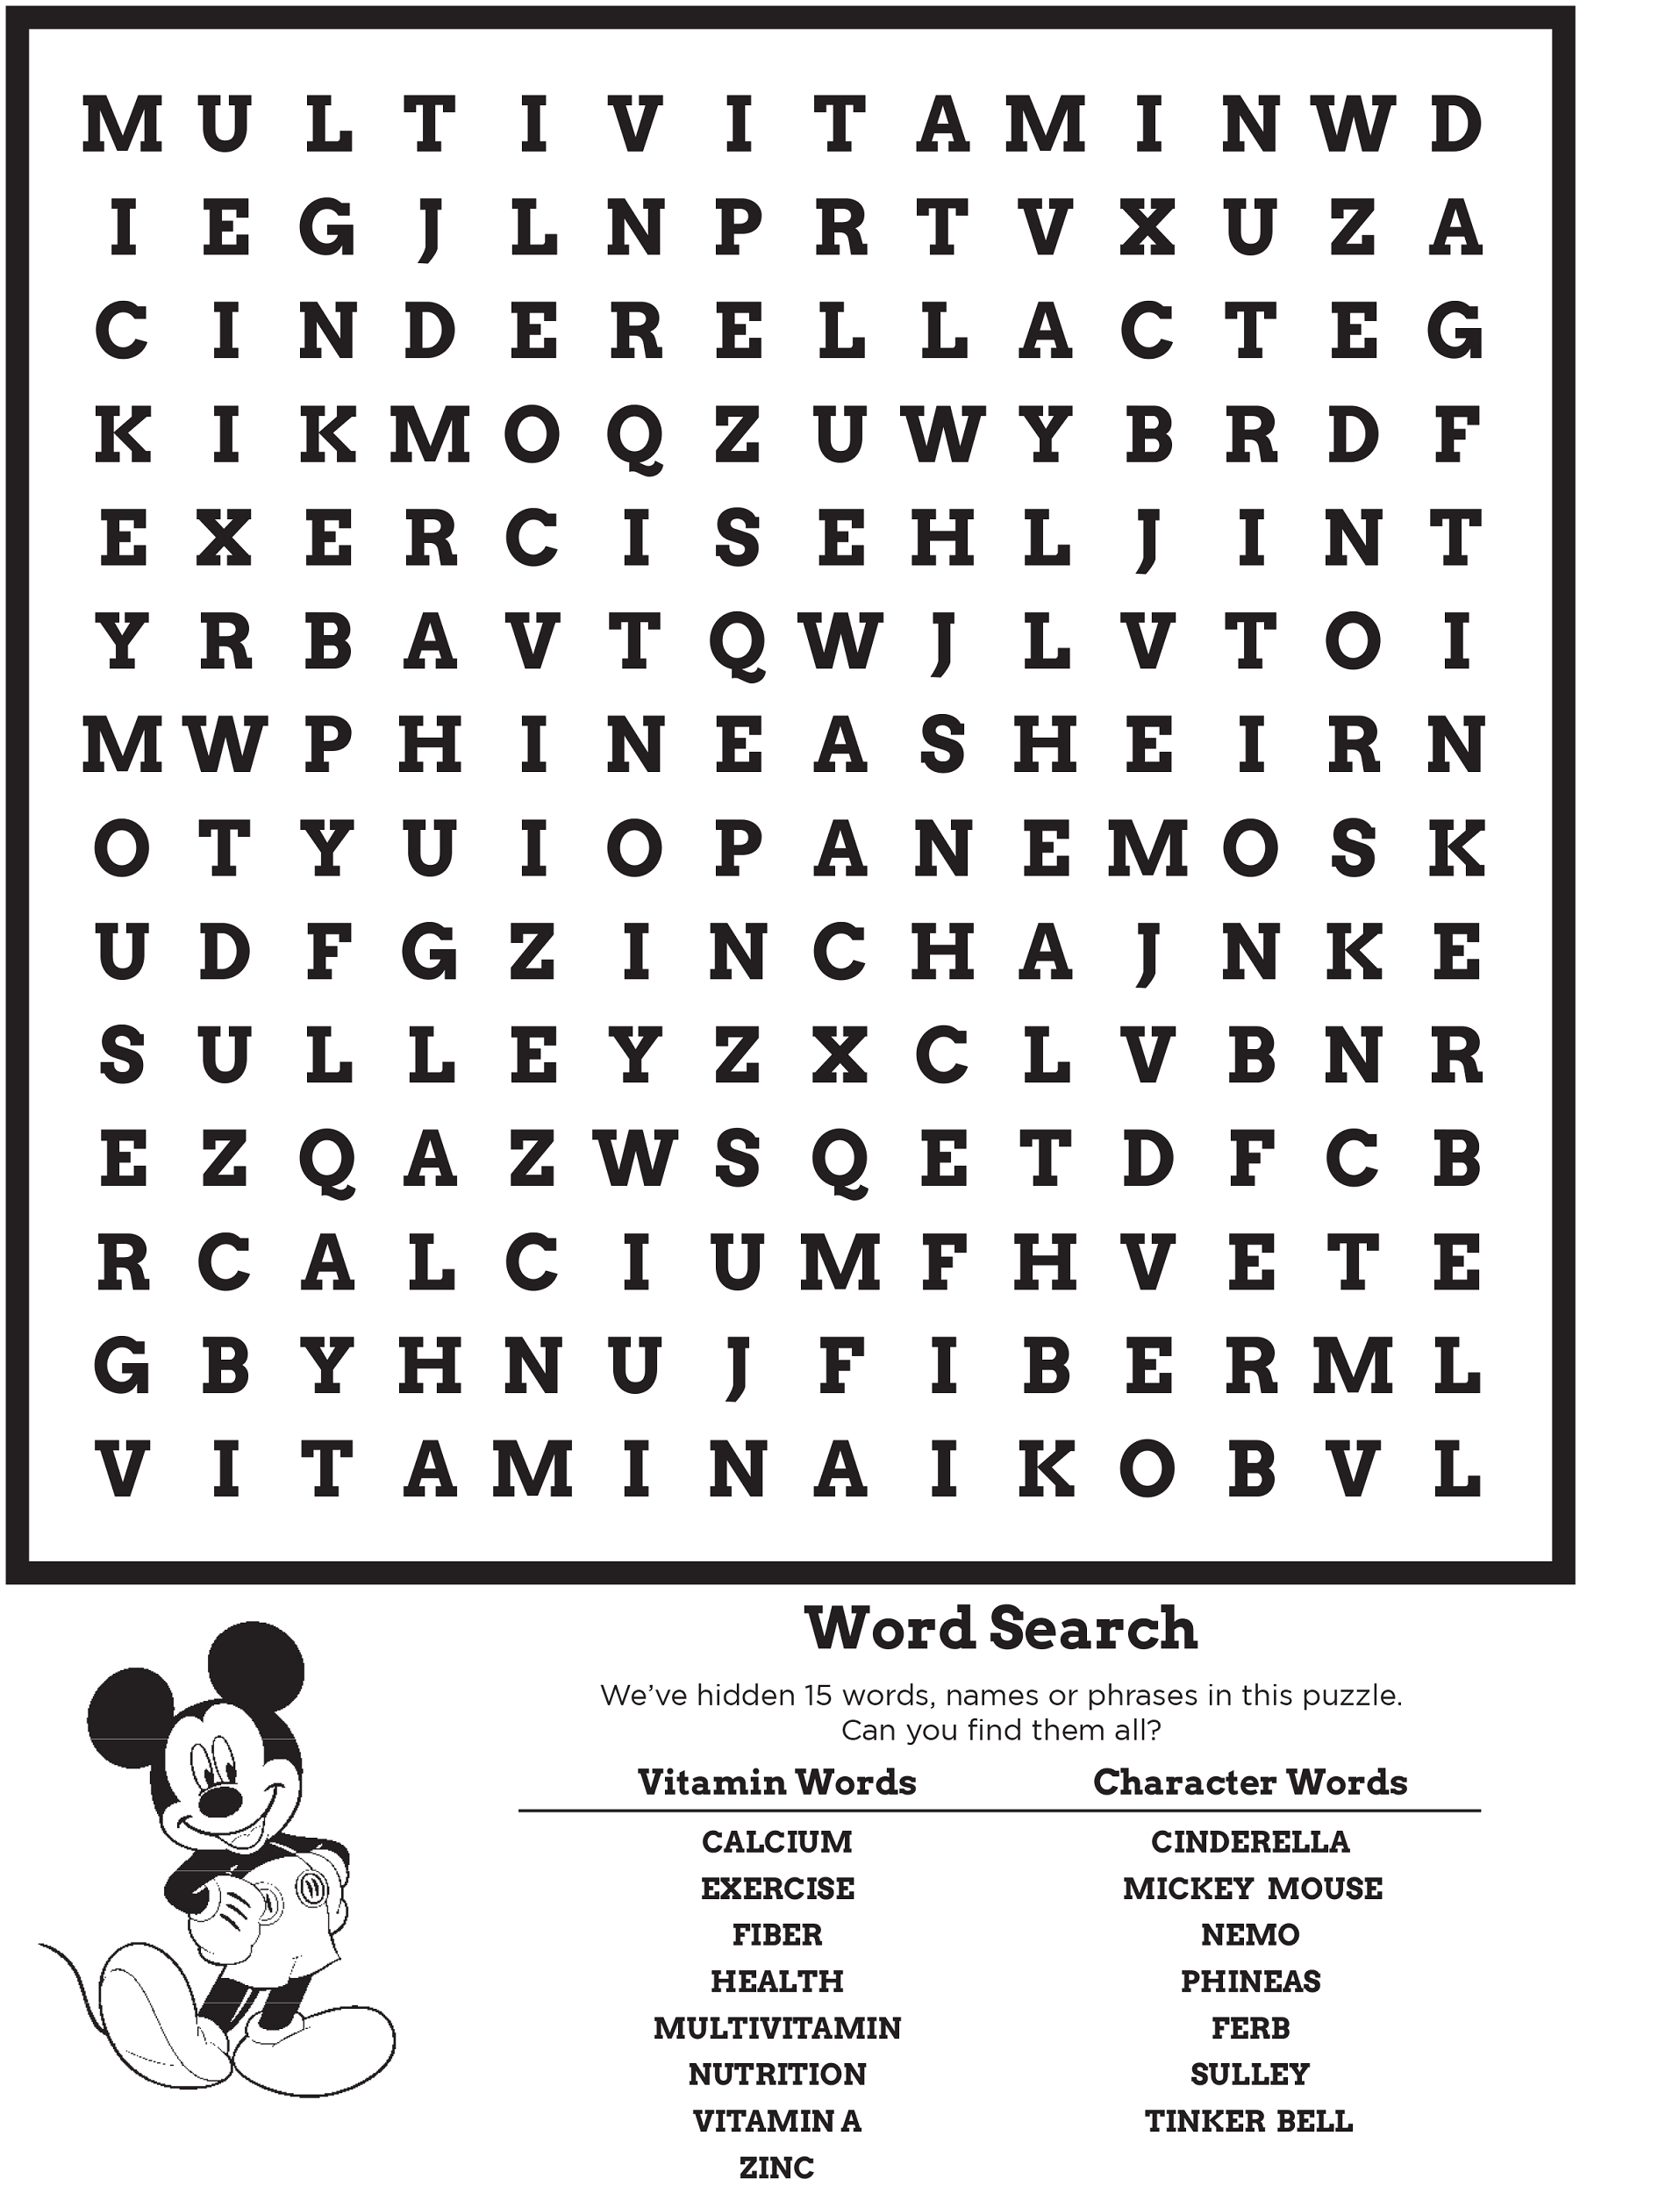 disney-word-search-puzzles-mickey